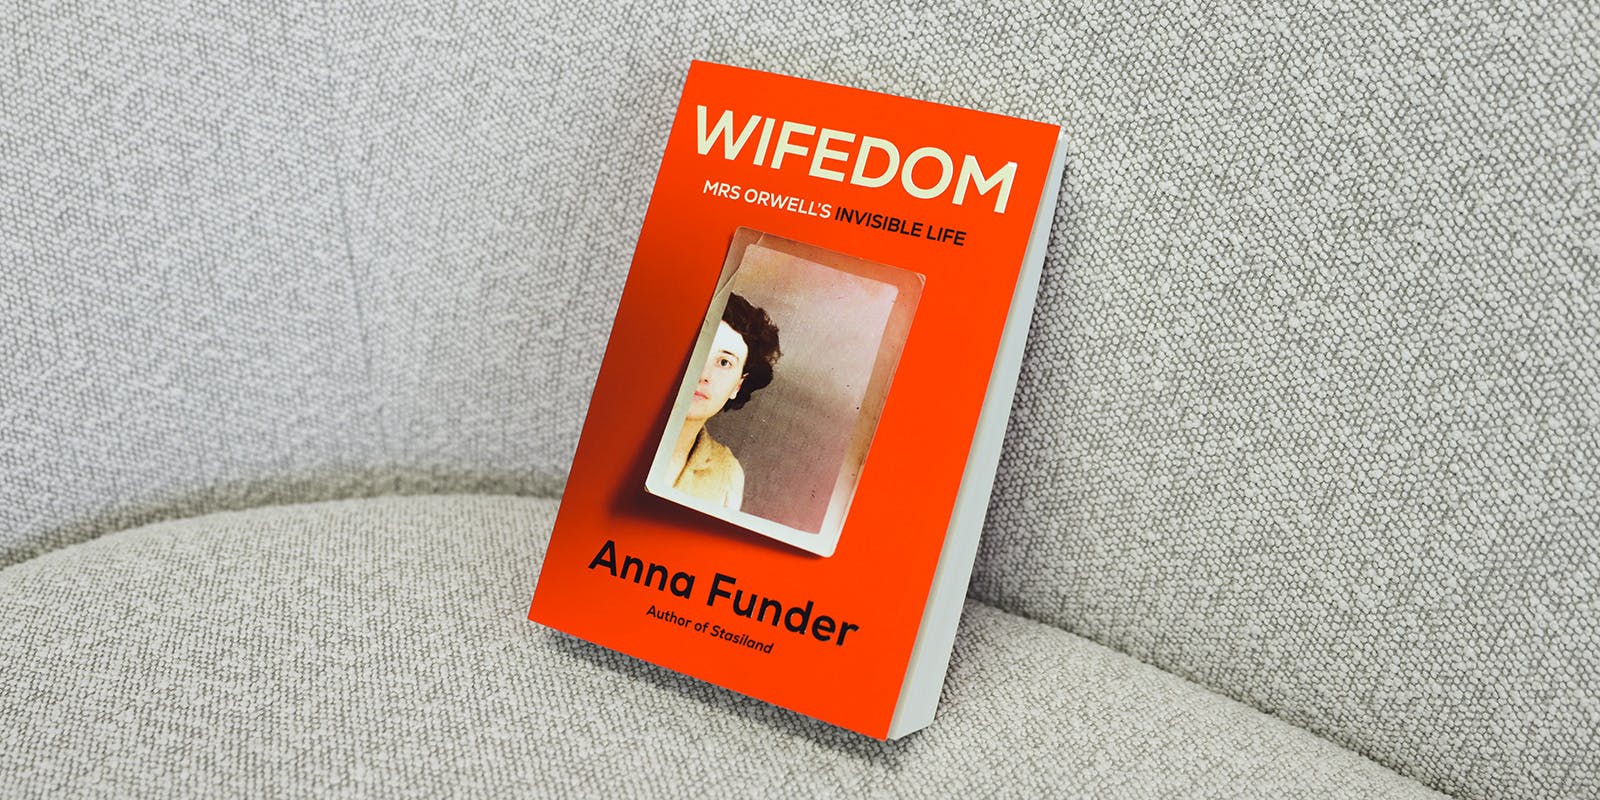 Wifedom book club questions